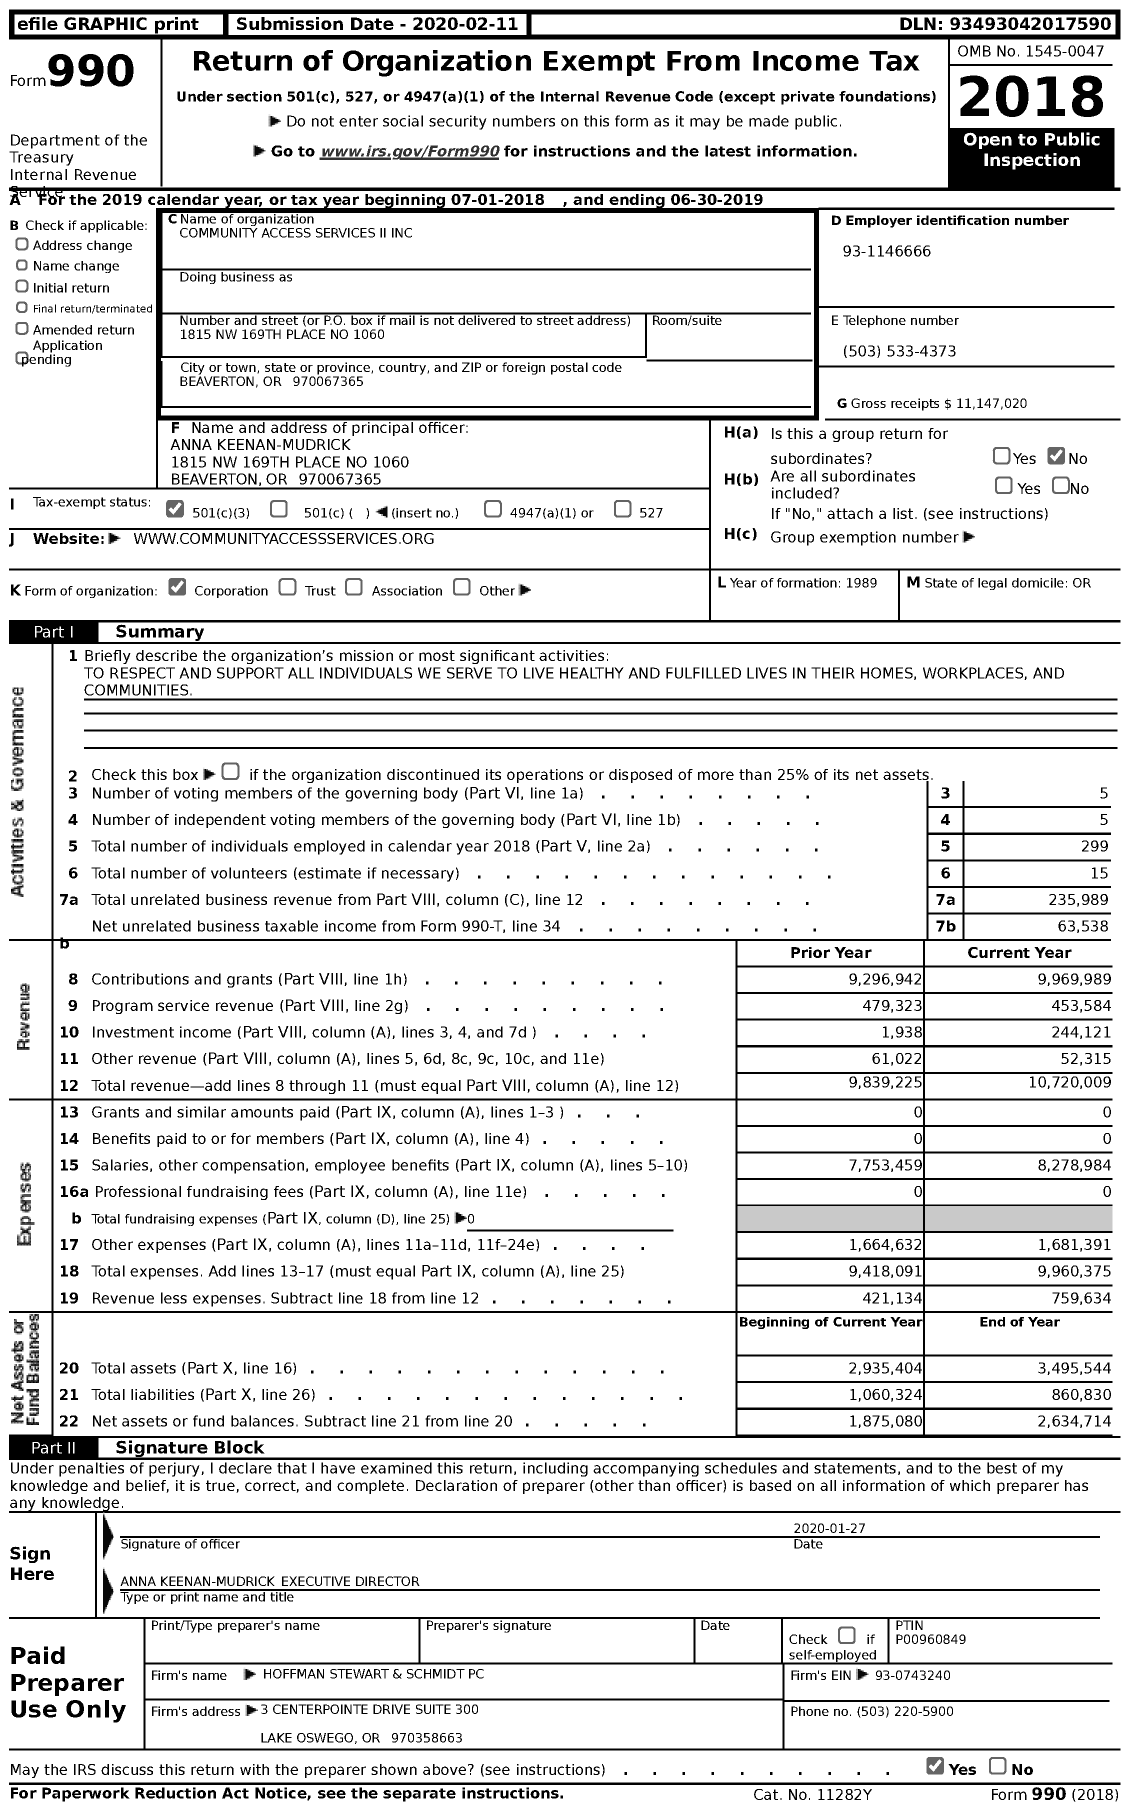 Image of first page of 2018 Form 990 for Community Access Services II